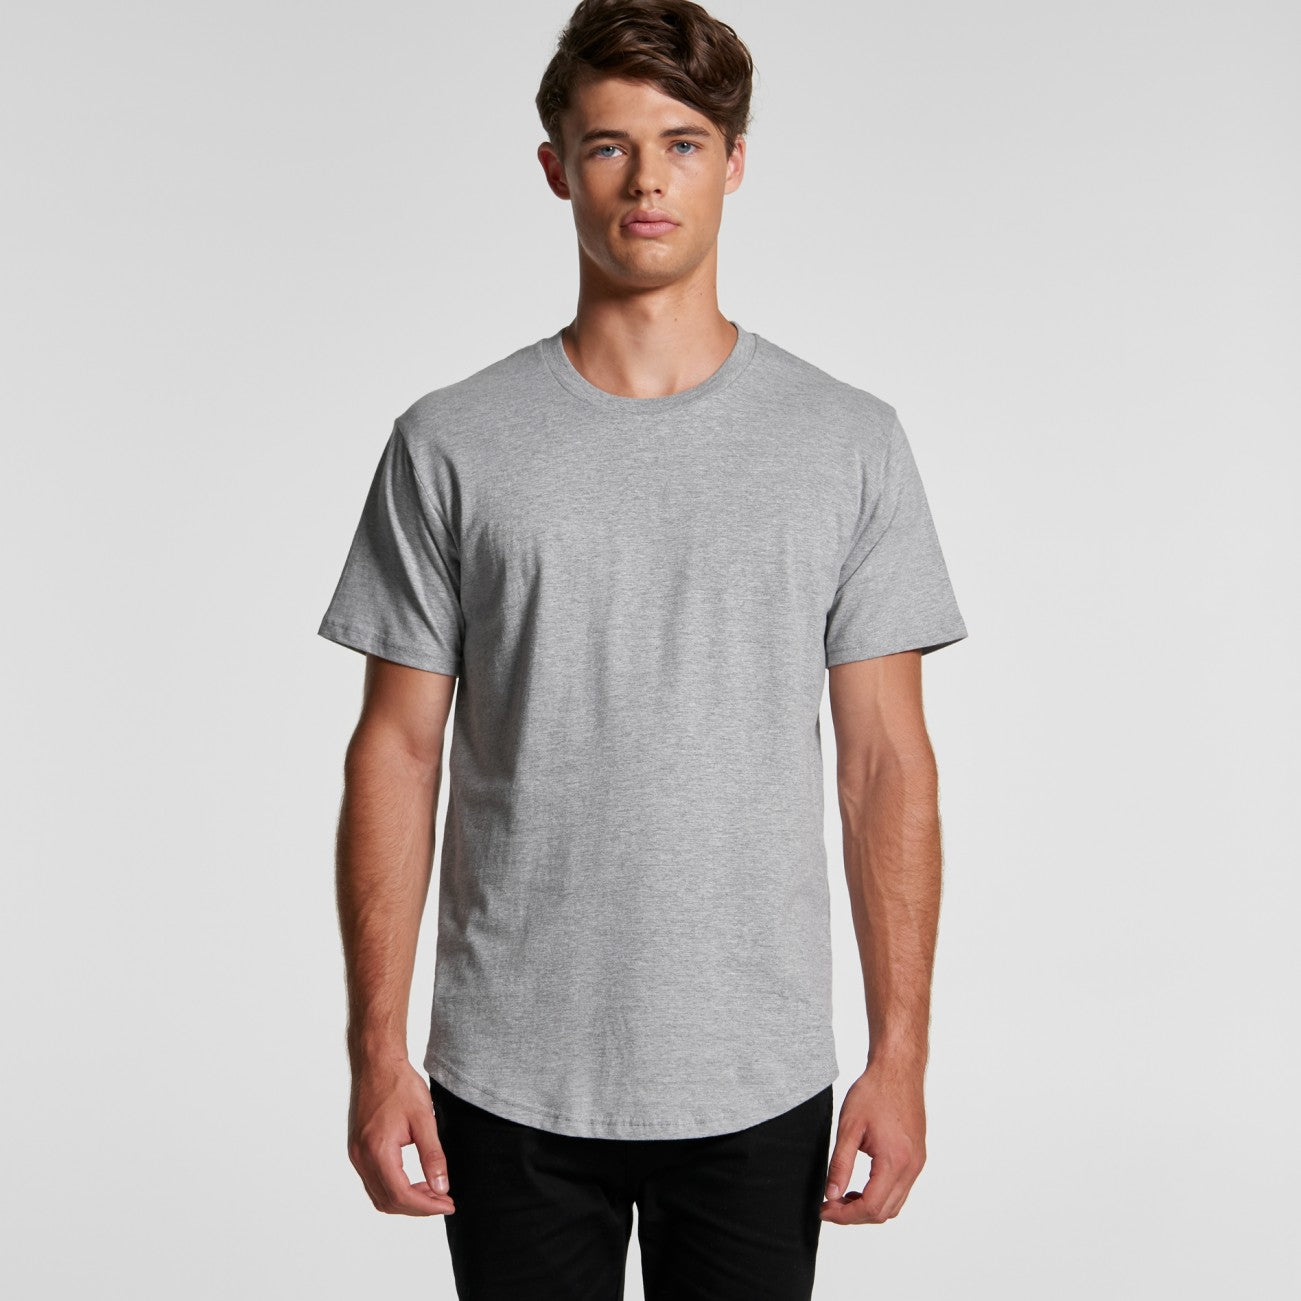 AS Colour Mens State Tee - 5052